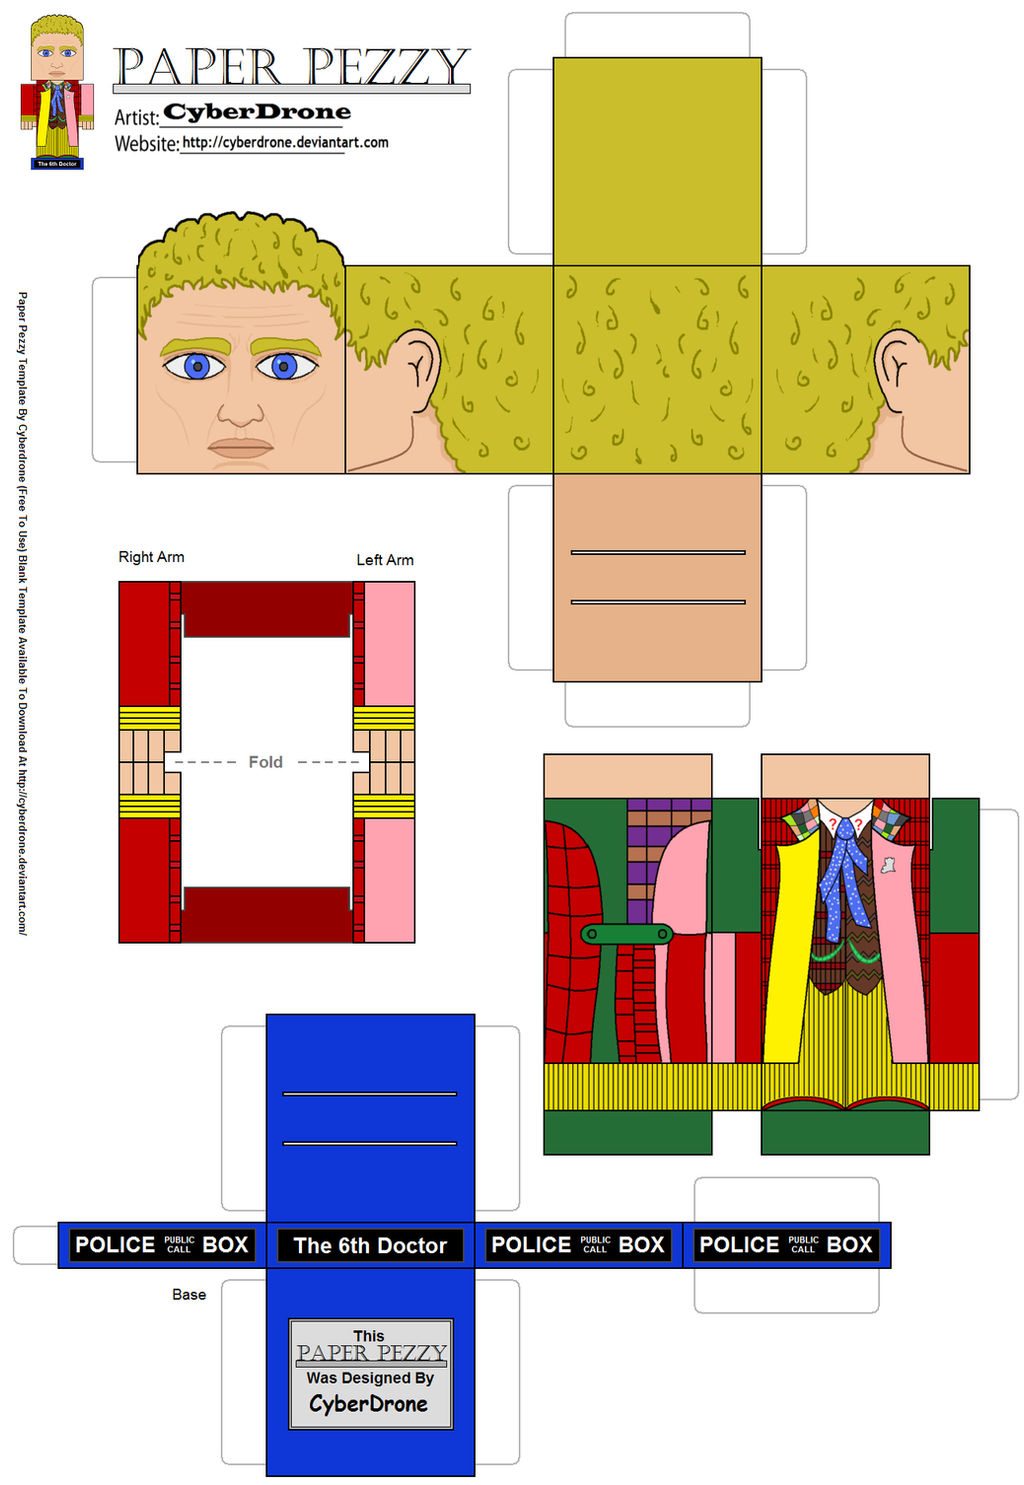 Paper Pezzy- The 6th Doctor by CyberDrone on DeviantArt